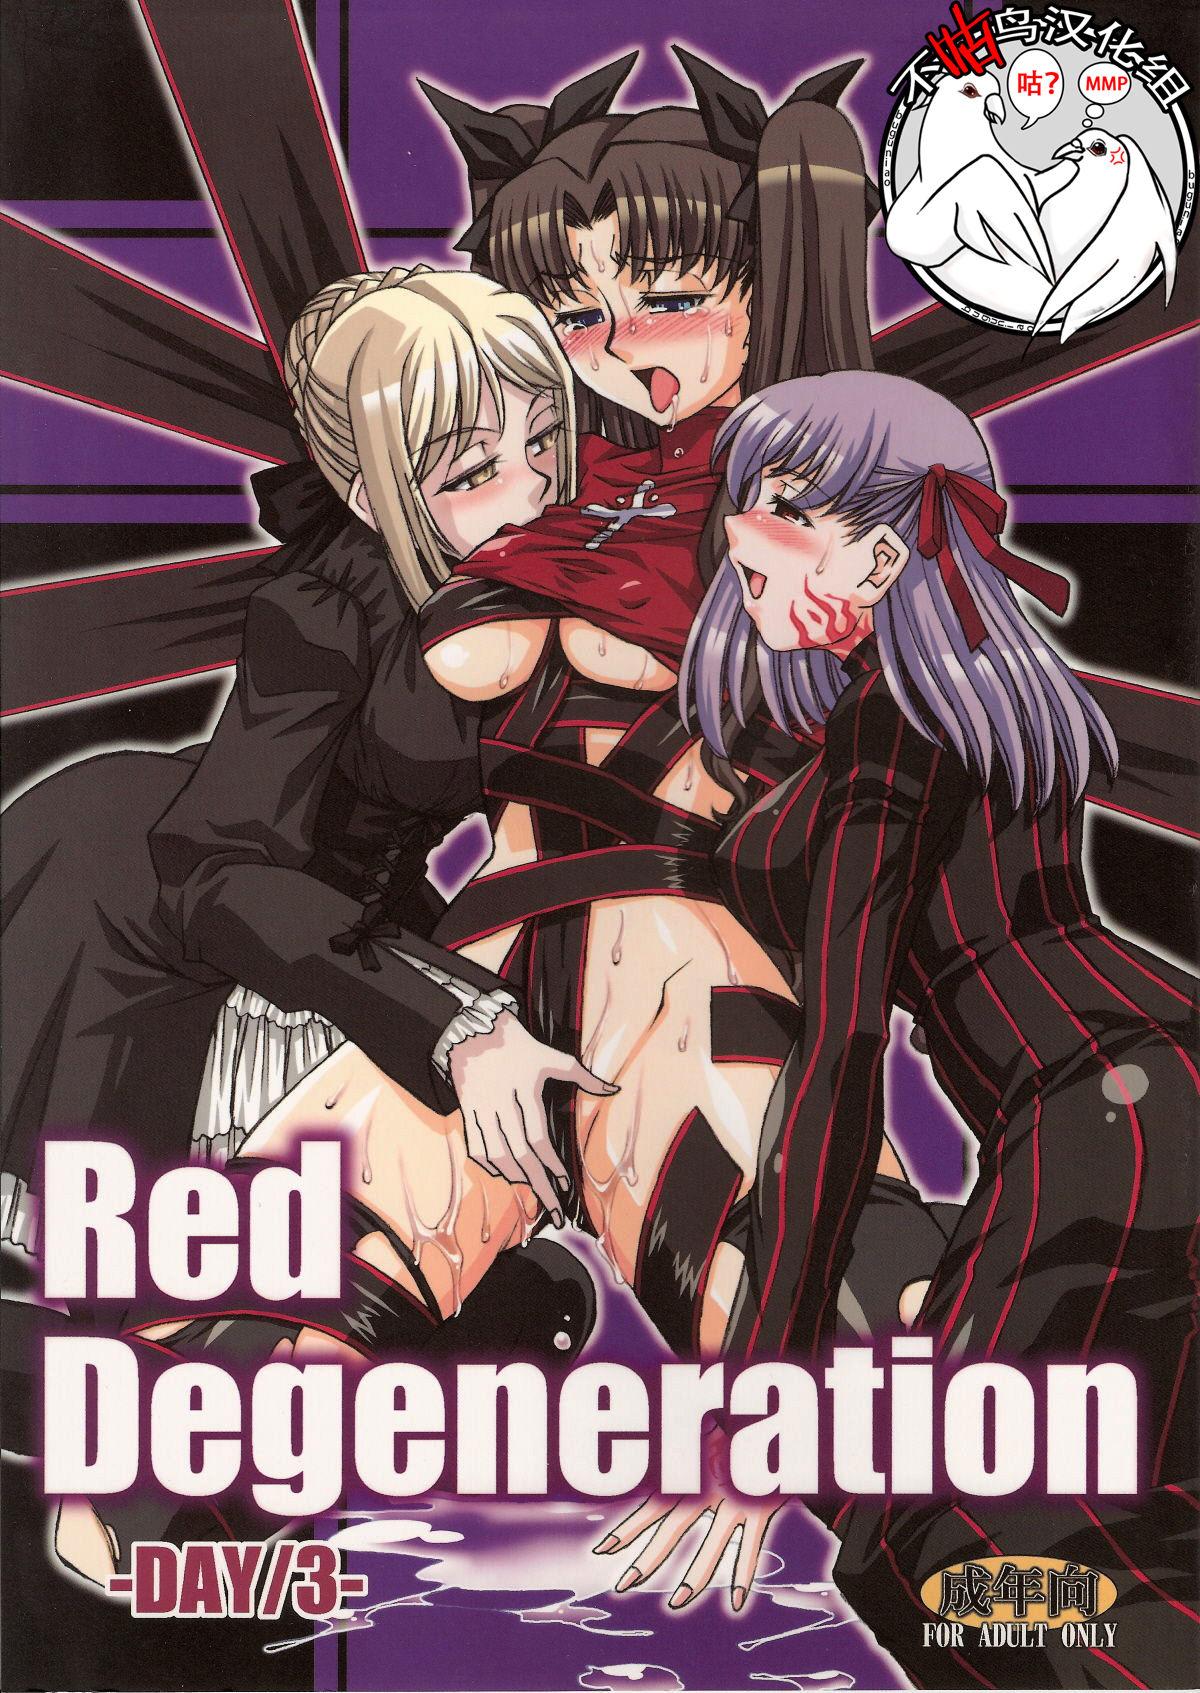 Jacking Red Degeneration - Fate stay night Uniform - Page 1